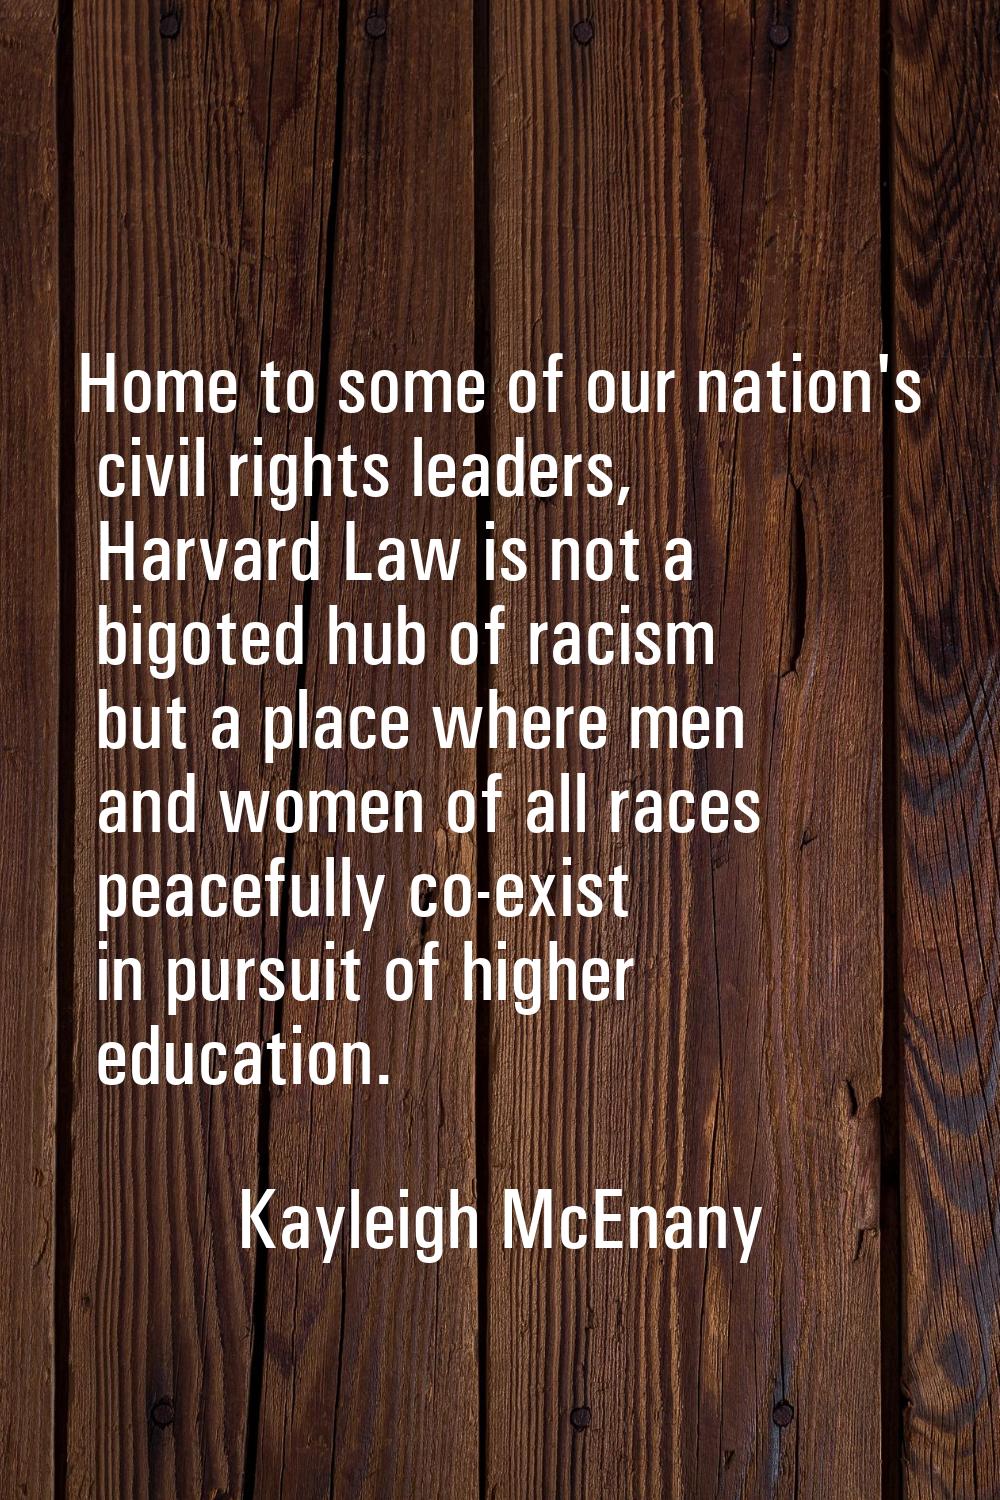 Home to some of our nation's civil rights leaders, Harvard Law is not a bigoted hub of racism but a